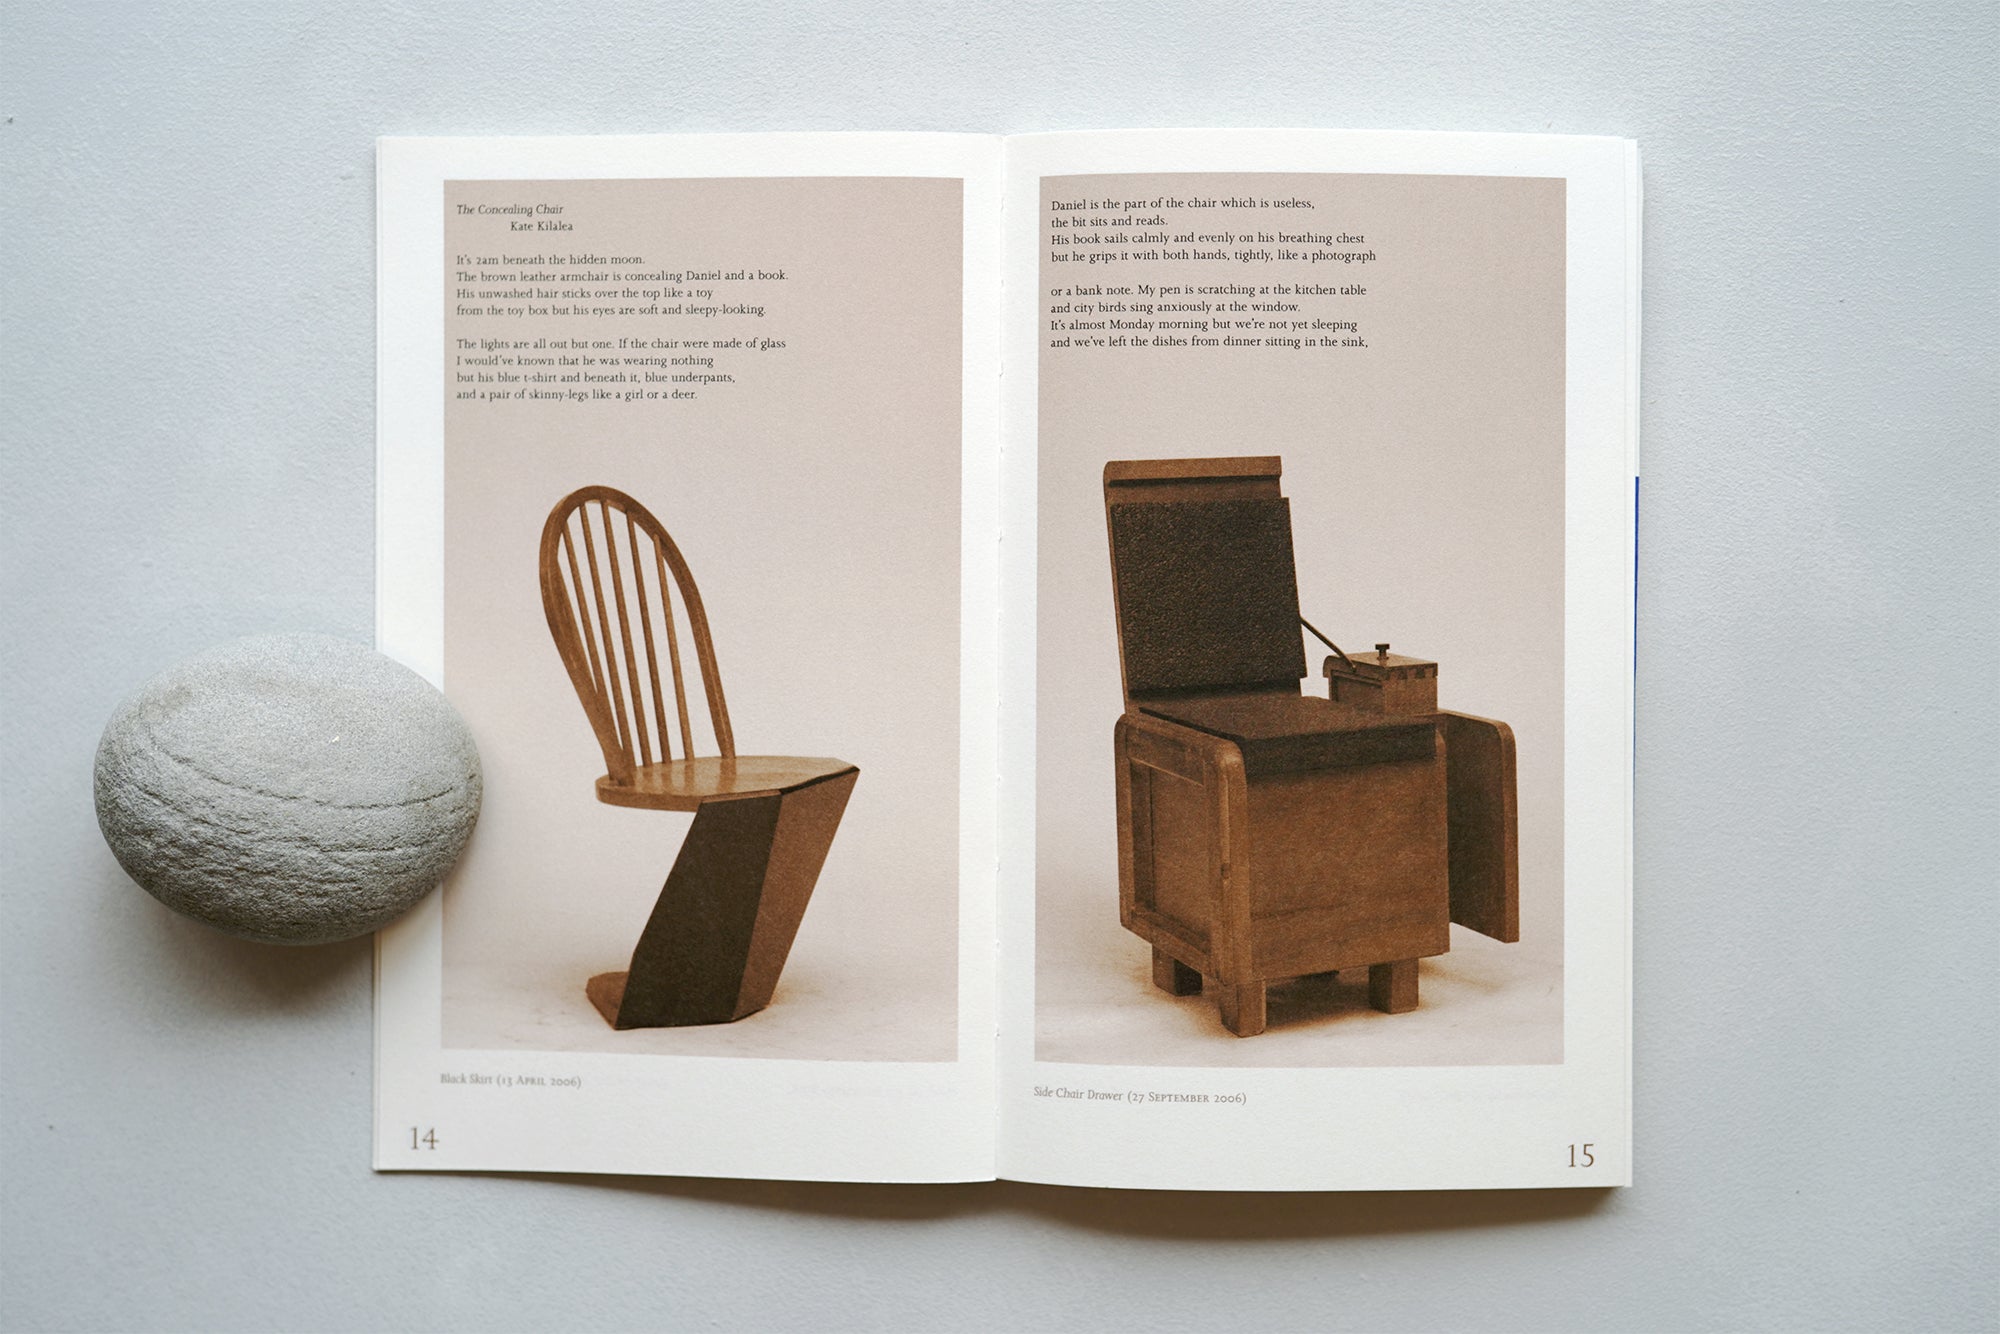 100Chairs in 100 Days and its 100 Ways (4th Edition) / Martino Gamper